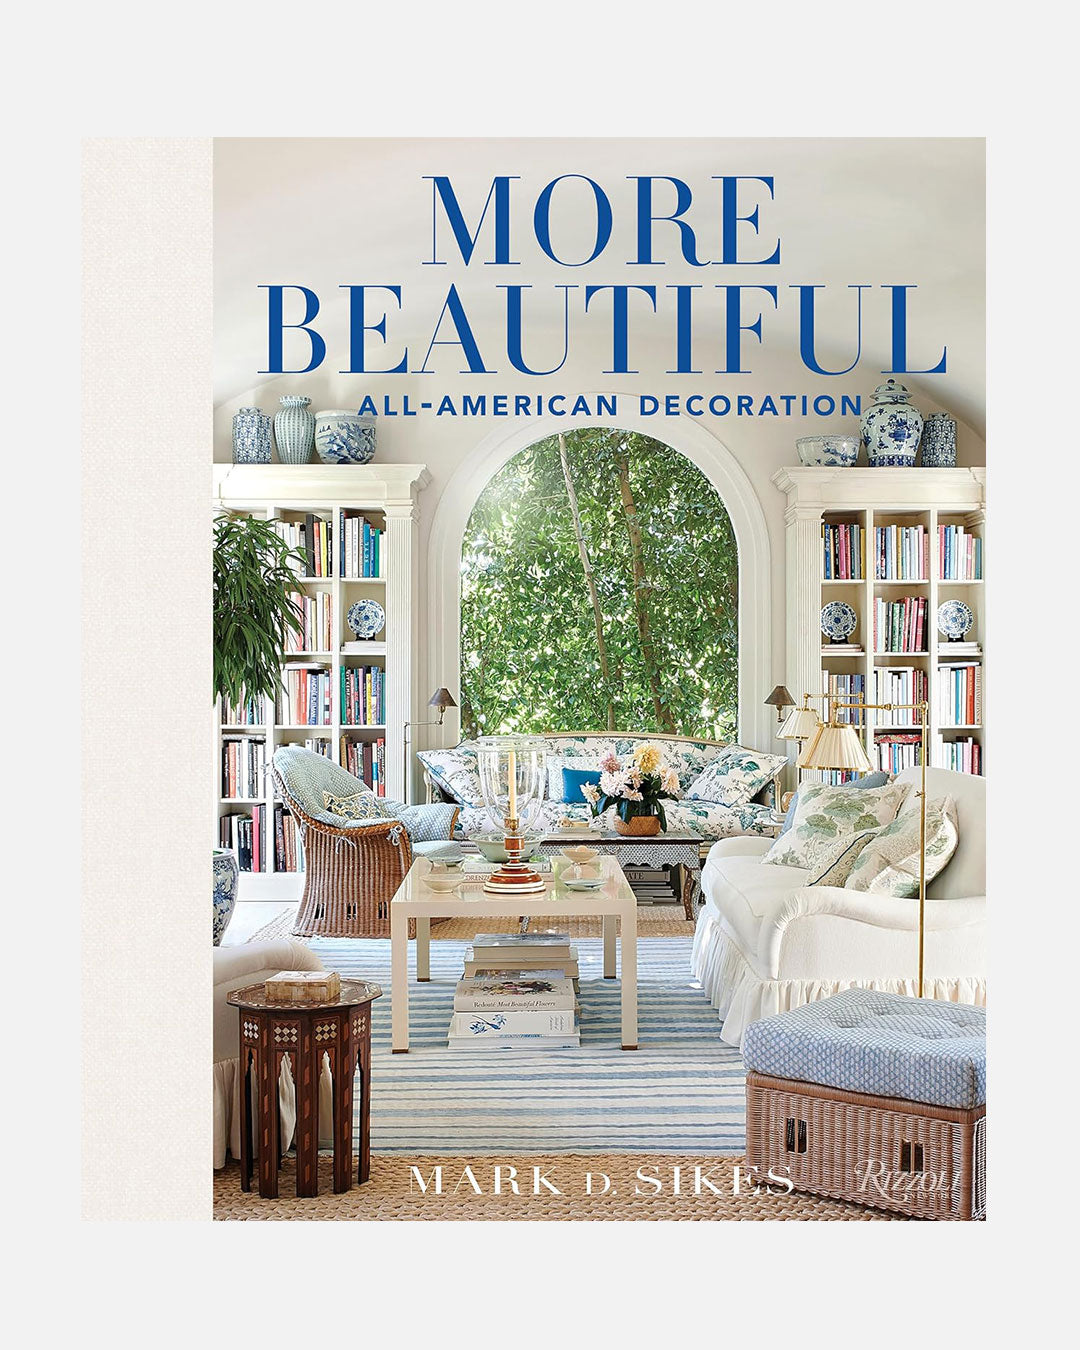 More Beautiful: All-American Decoration by Mark D. Sikes